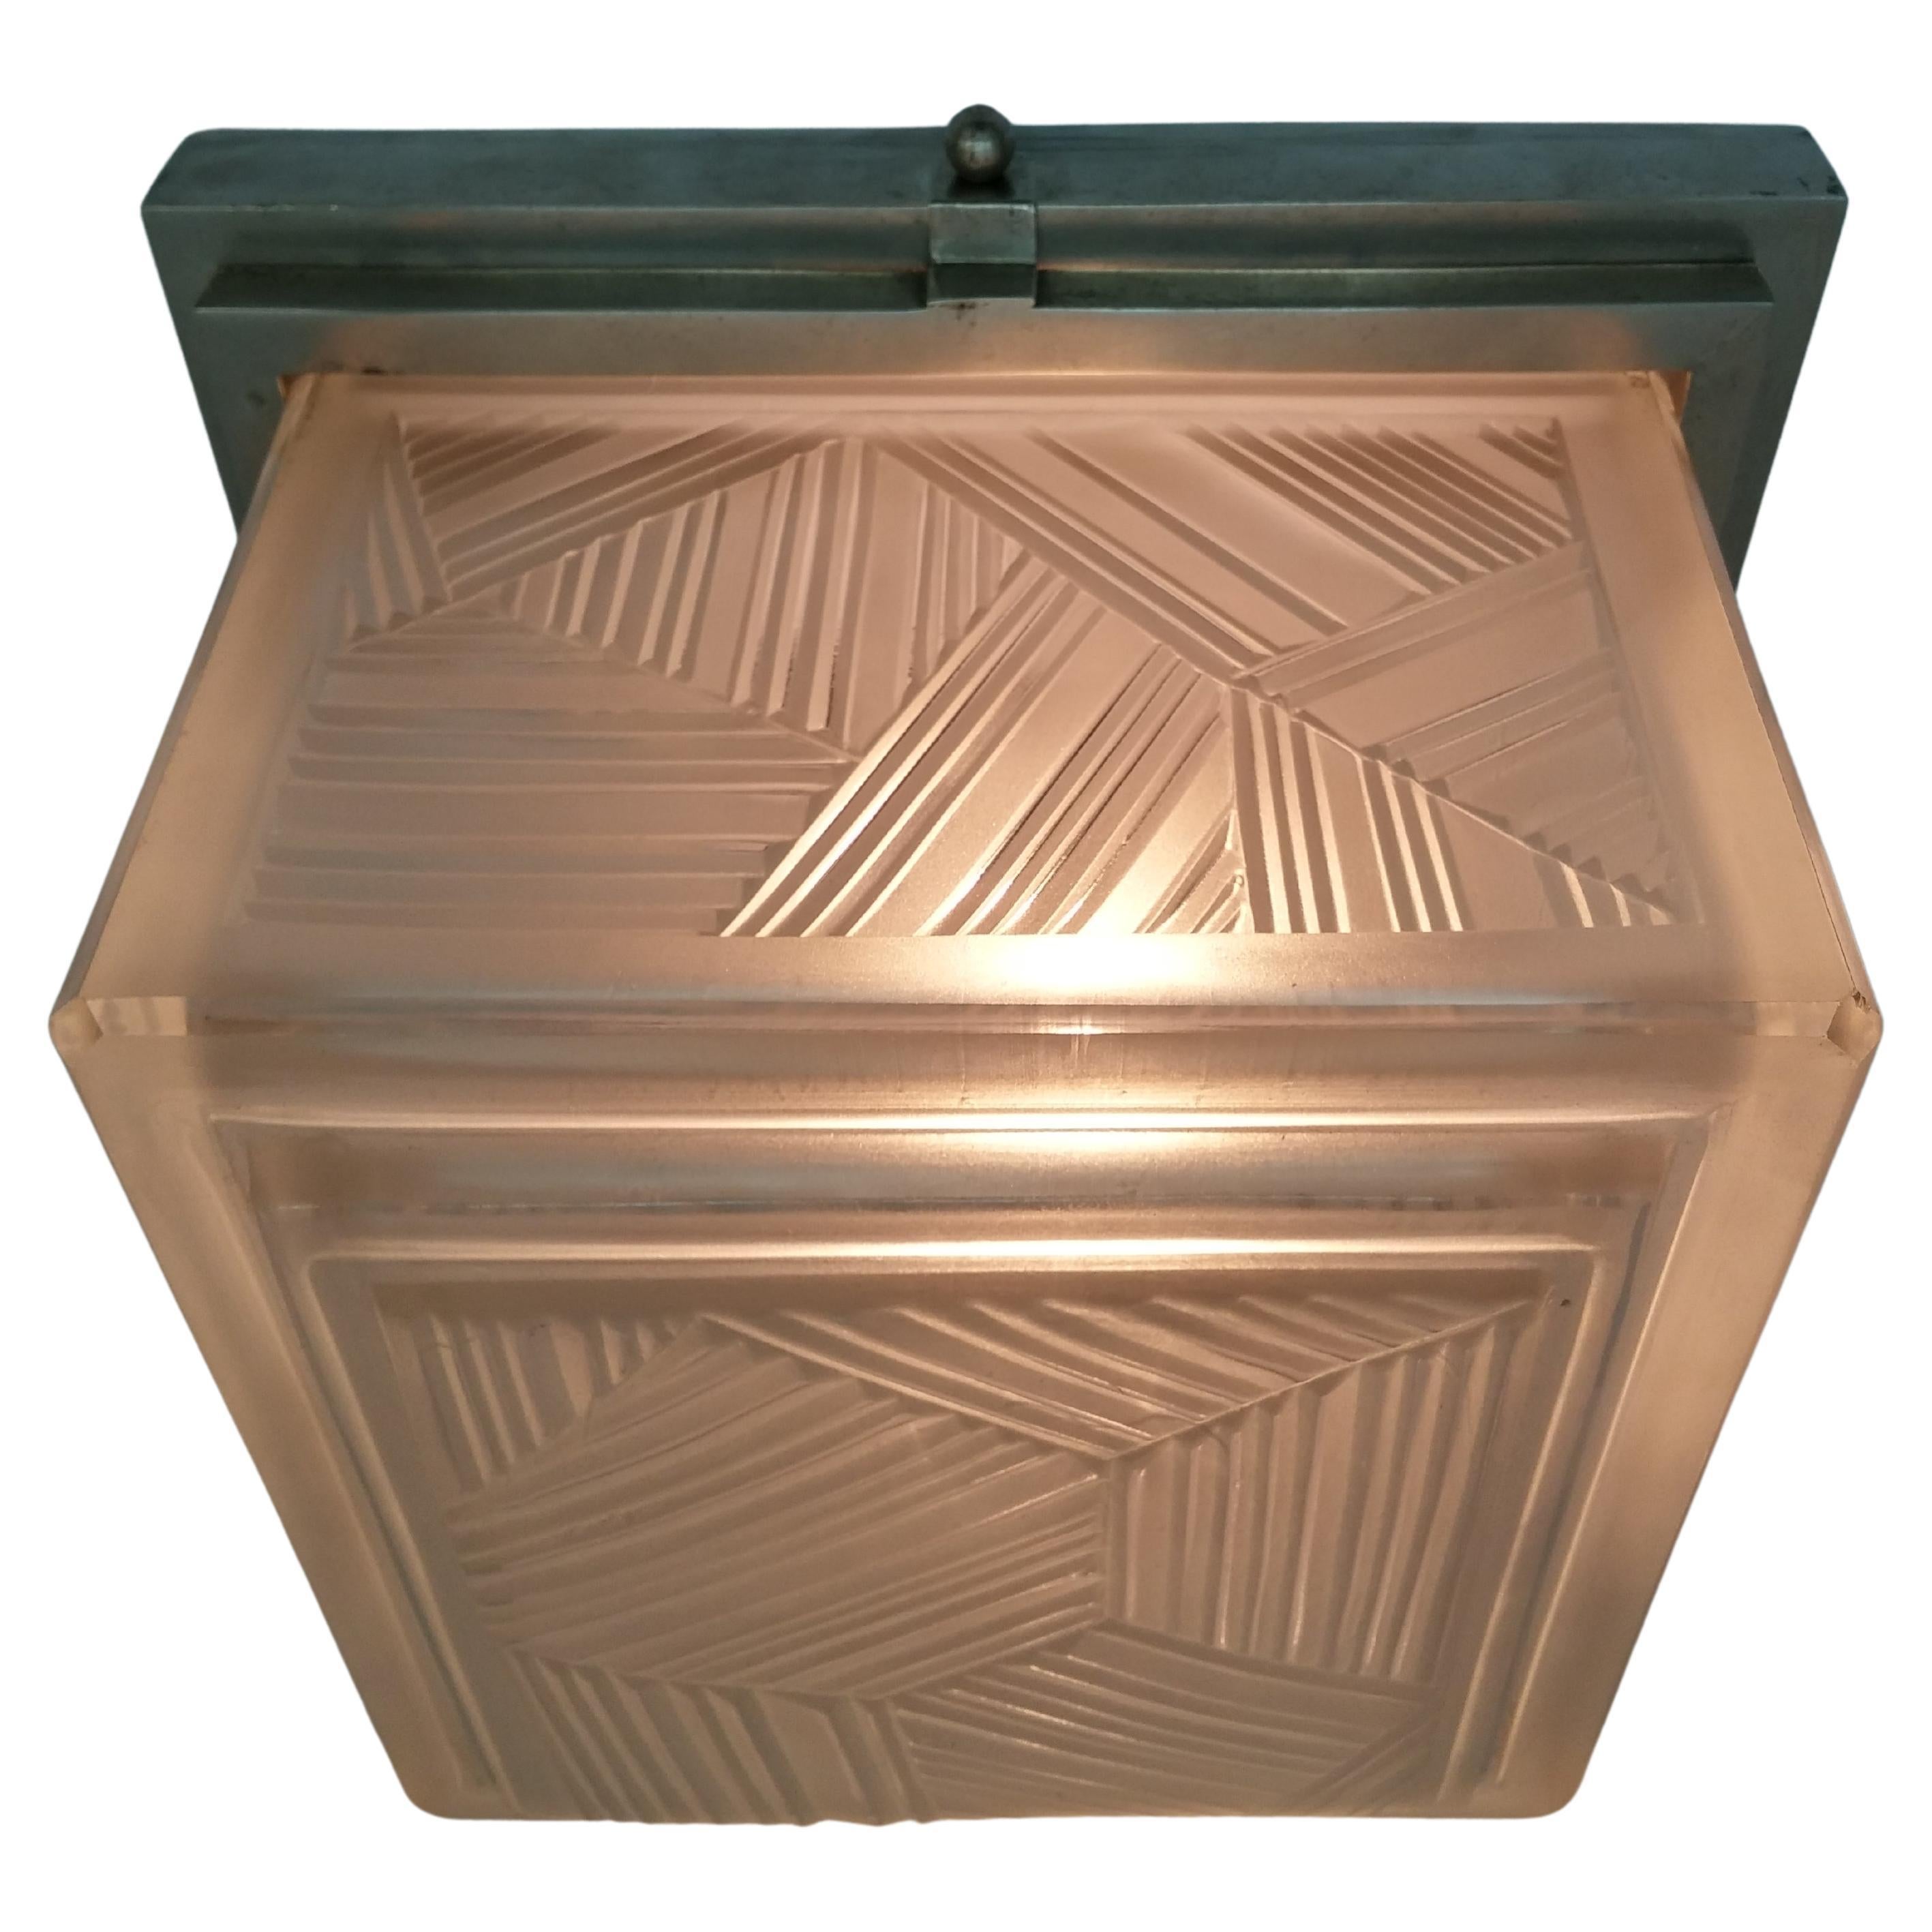 A stunning French Art Deco Square shaped Flush Mount was created in the 1930s by 